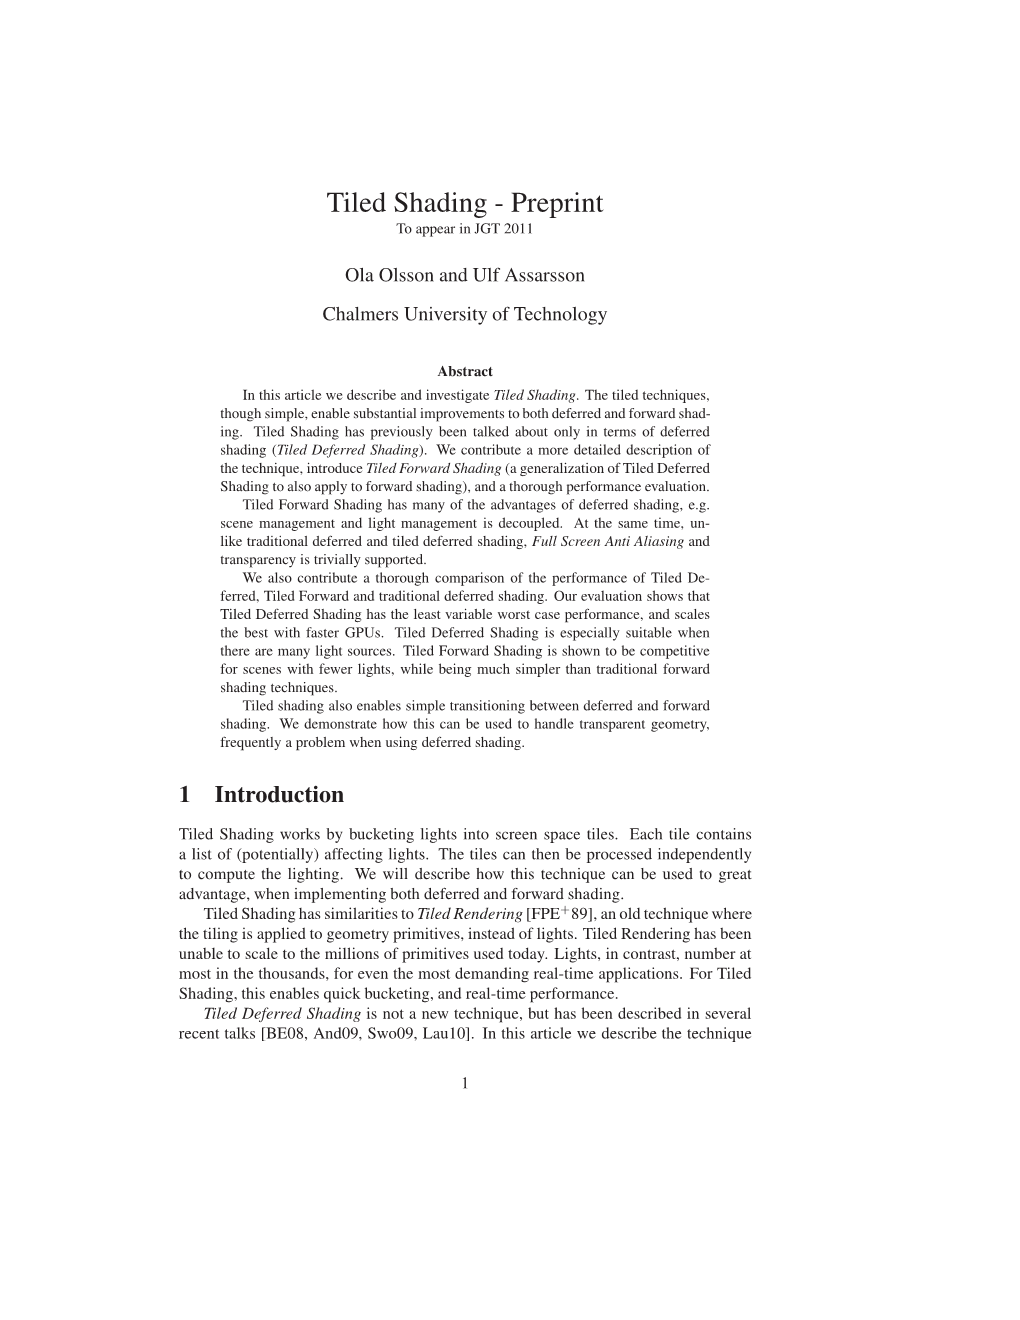 Tiled Shading - Preprint to Appear in JGT 2011